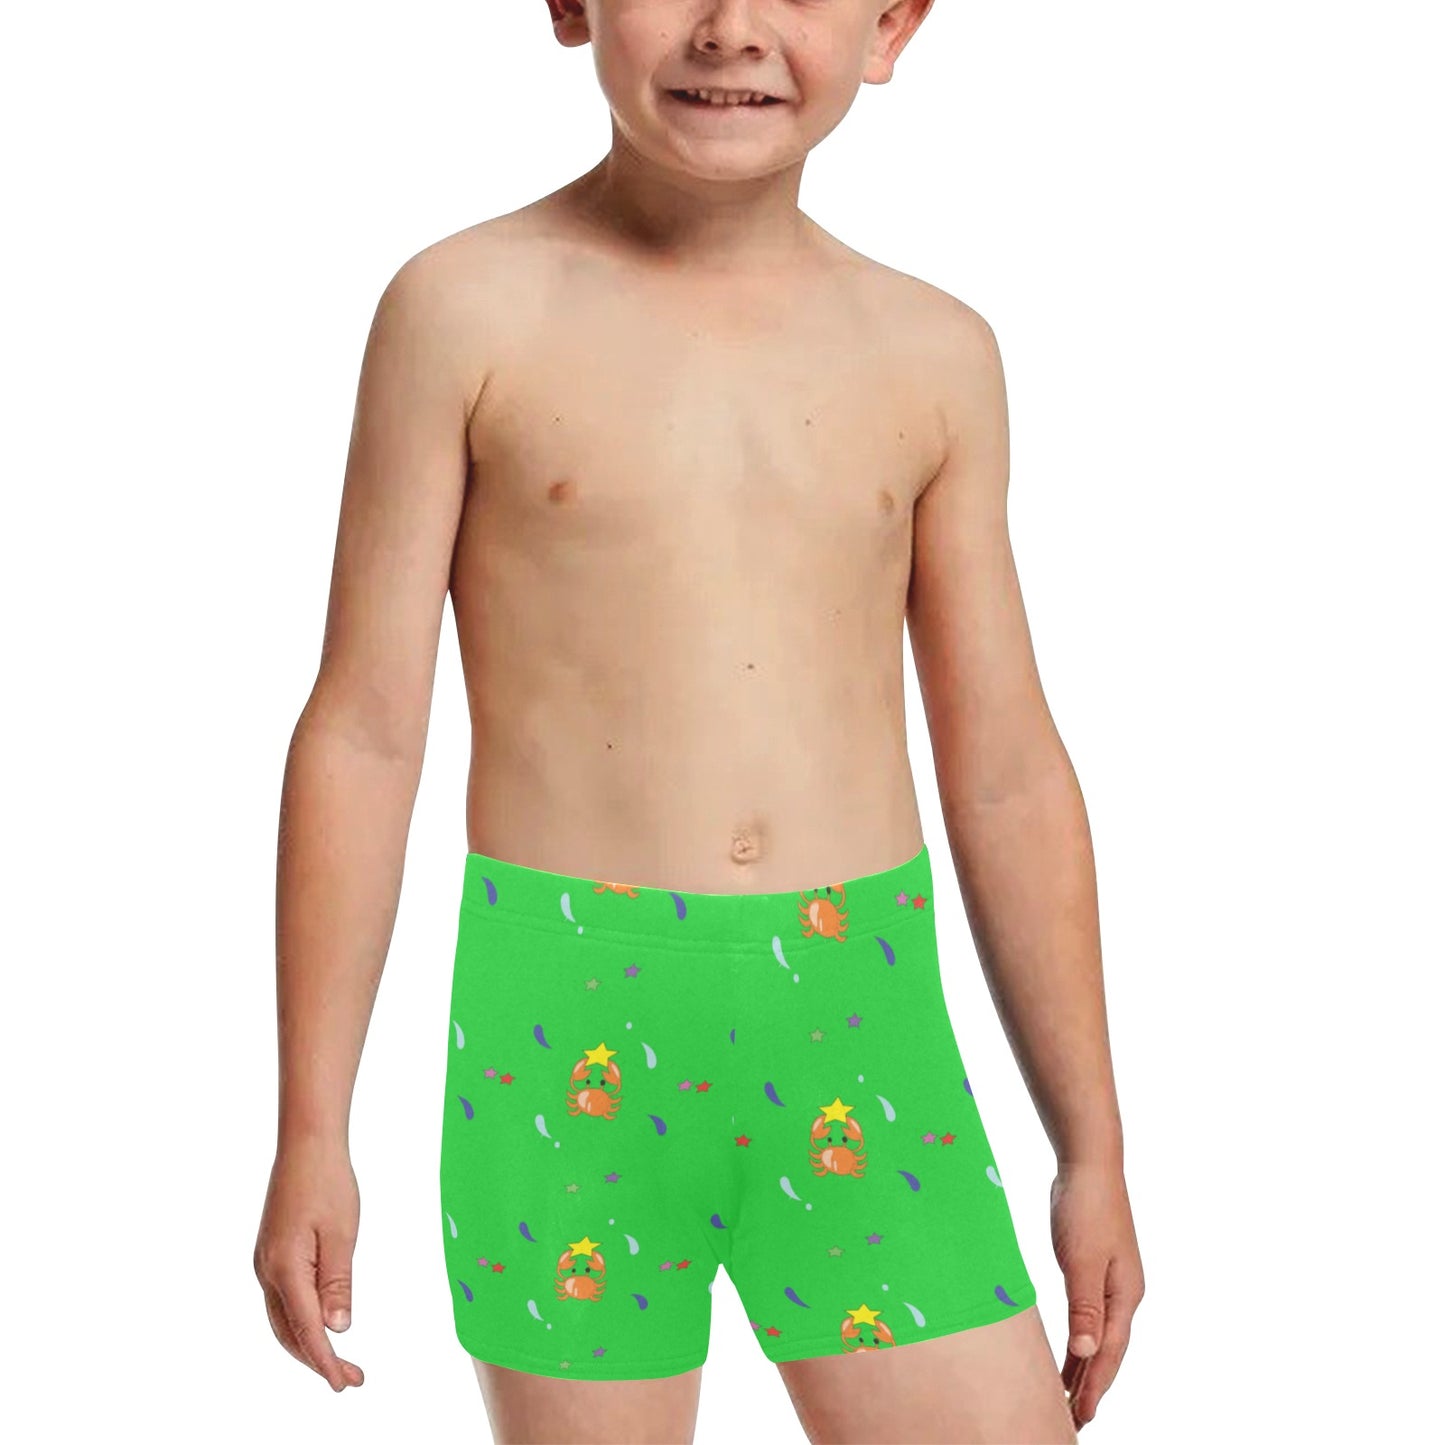 Boys' Swimming Trunks "Patterned stars and crabble"